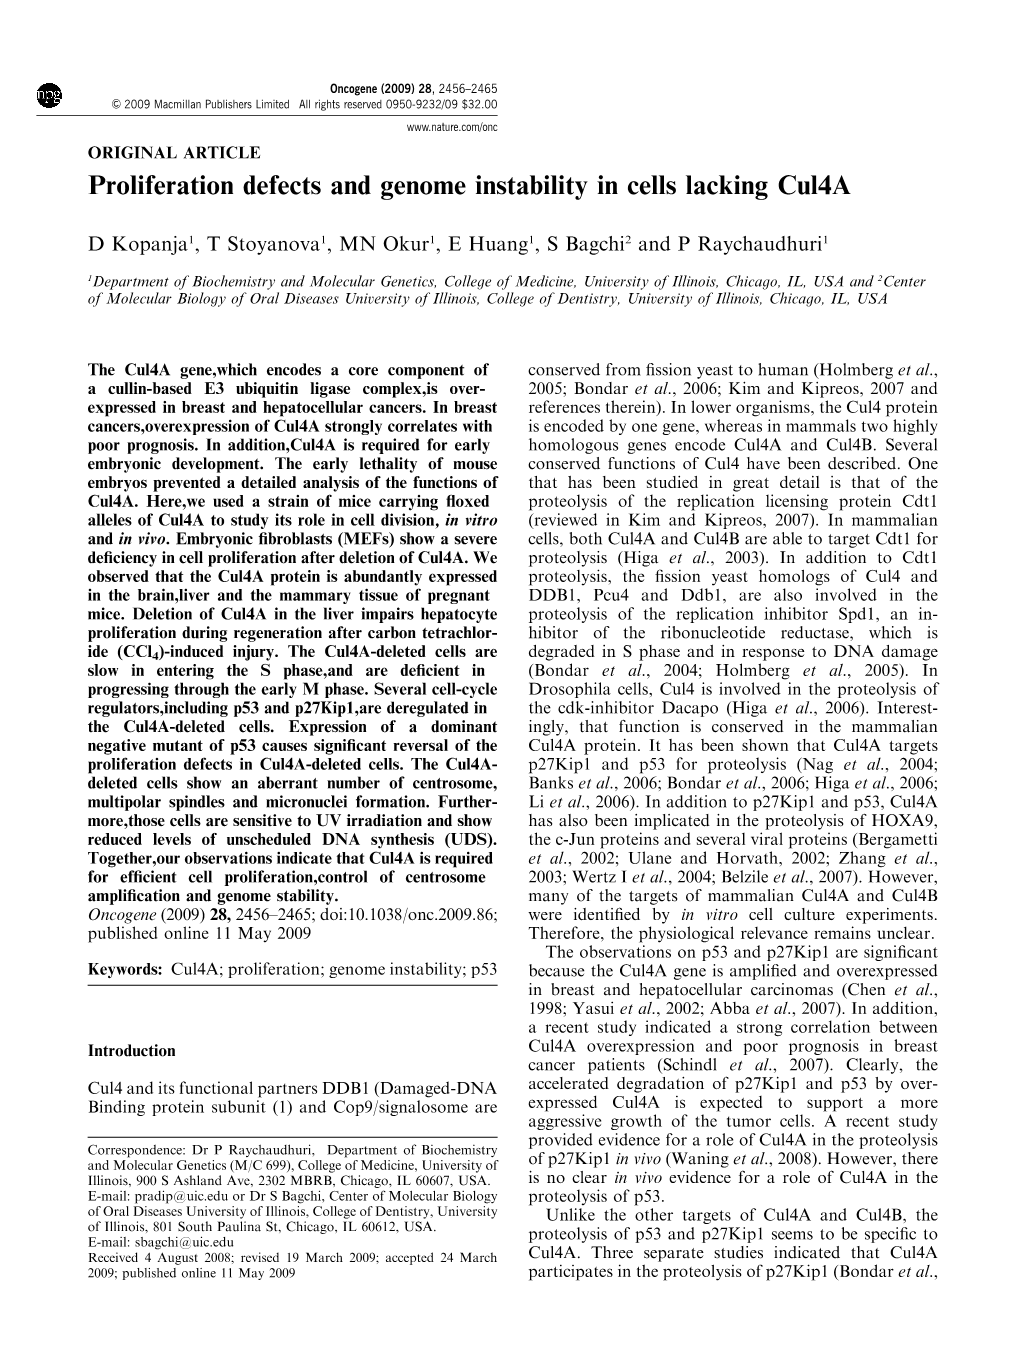 Proliferation Defects and Genome Instability in Cells Lacking Cul4a